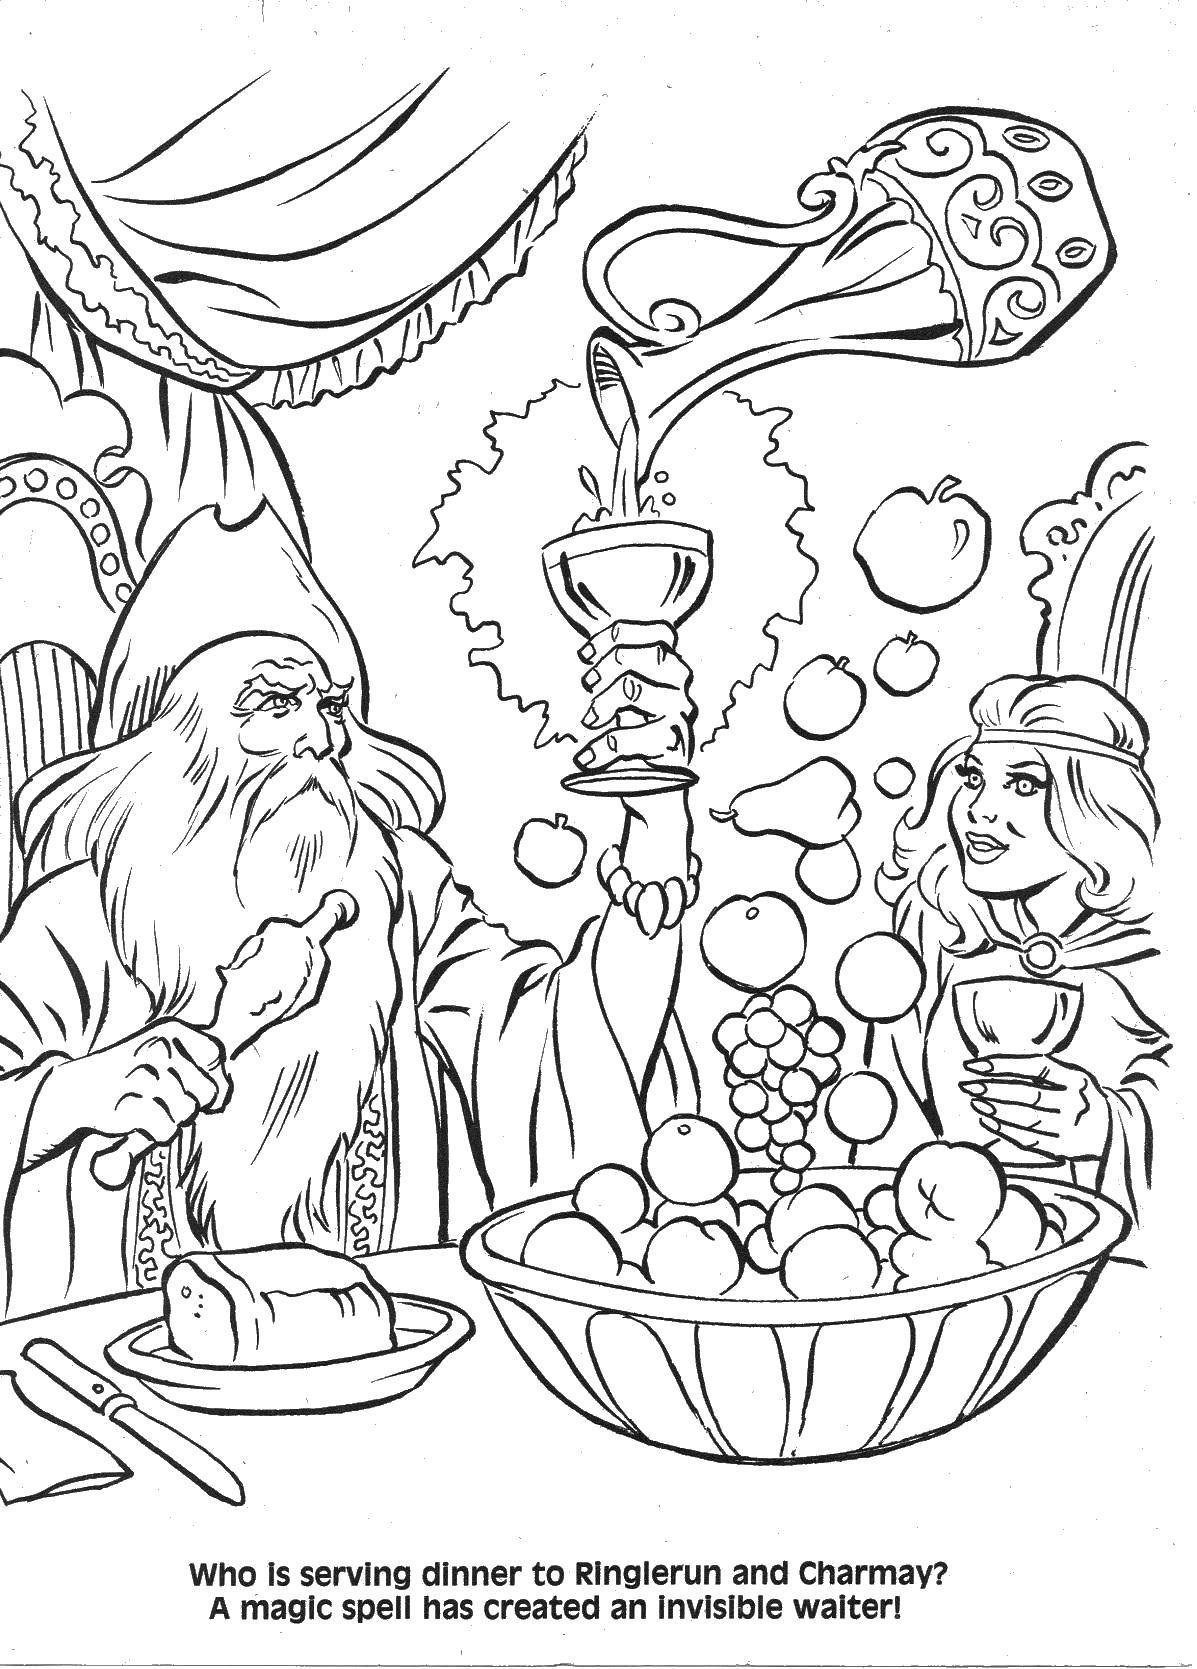 Coloring The wizard ringlerun and Isabella. Category The characters from fairy tales. Tags:  wizard, guest.